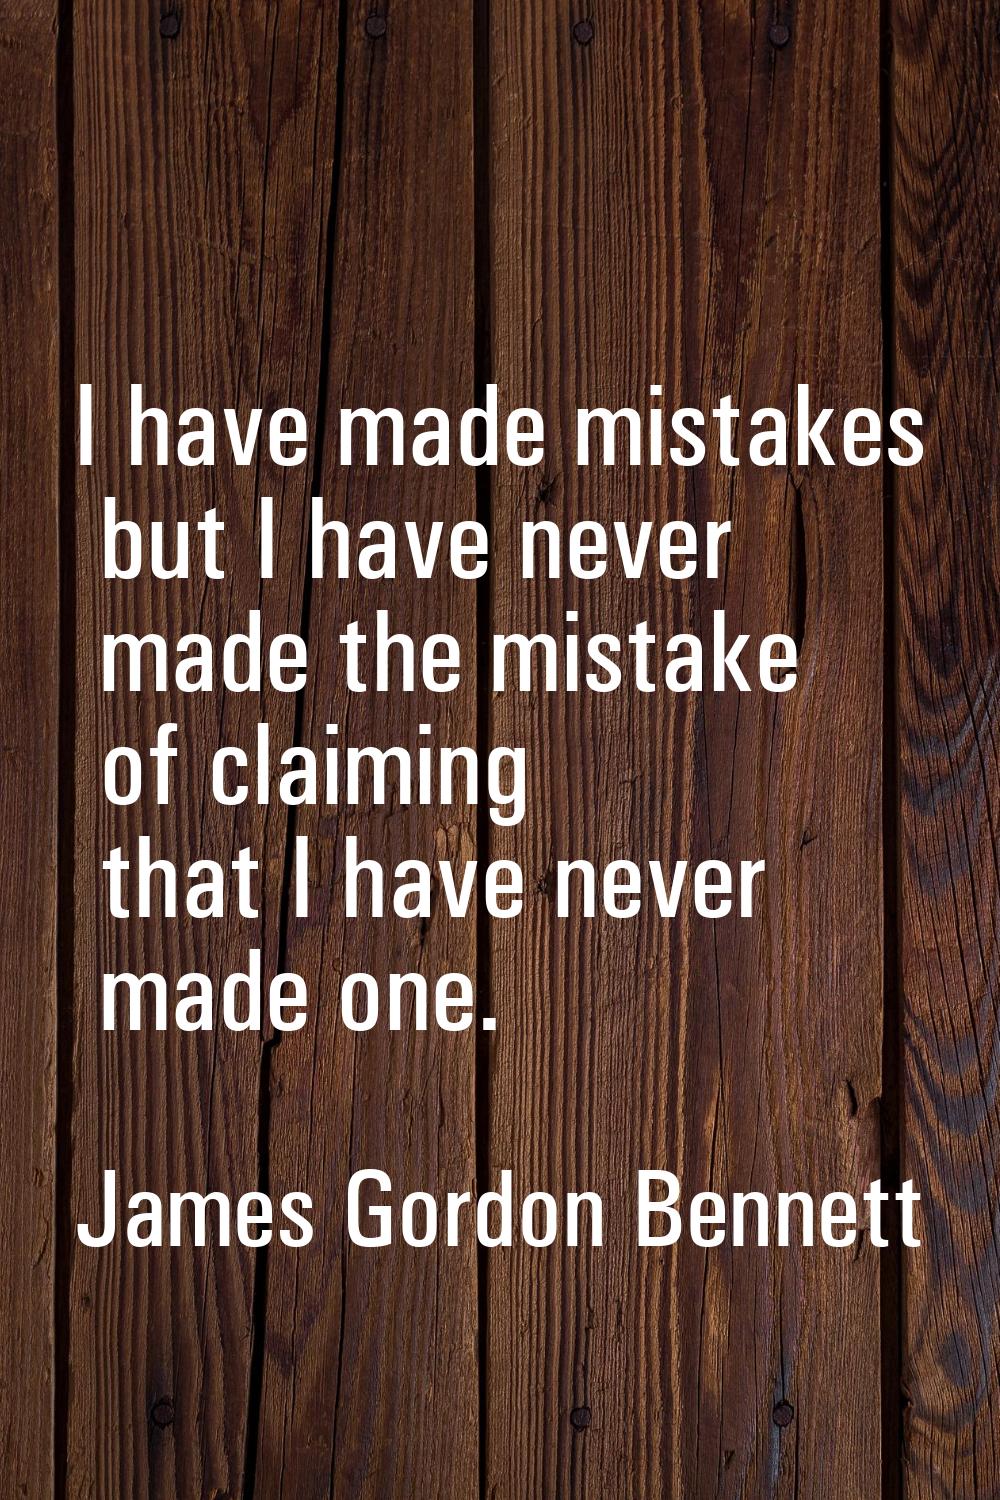 I have made mistakes but I have never made the mistake of claiming that I have never made one.